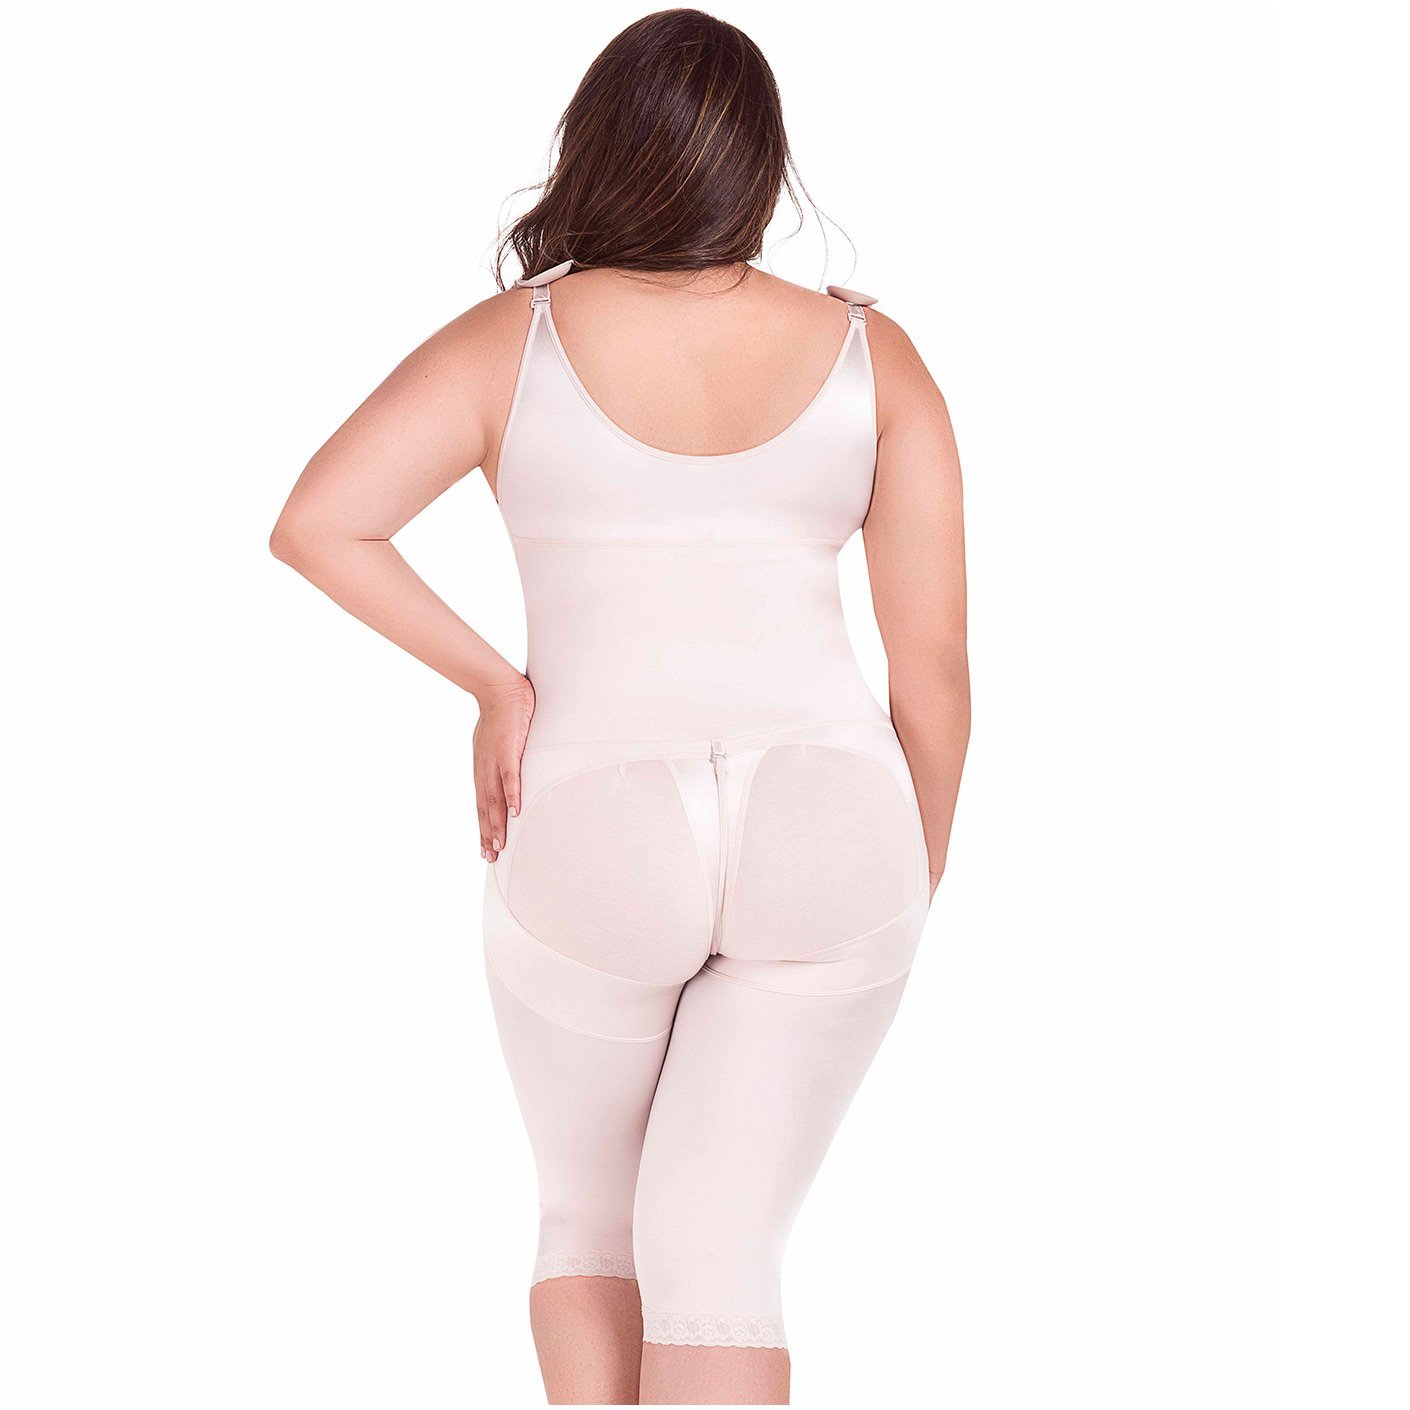 MariaE 9312 Full Body Shaper with Strap Cushions - New England Supplier